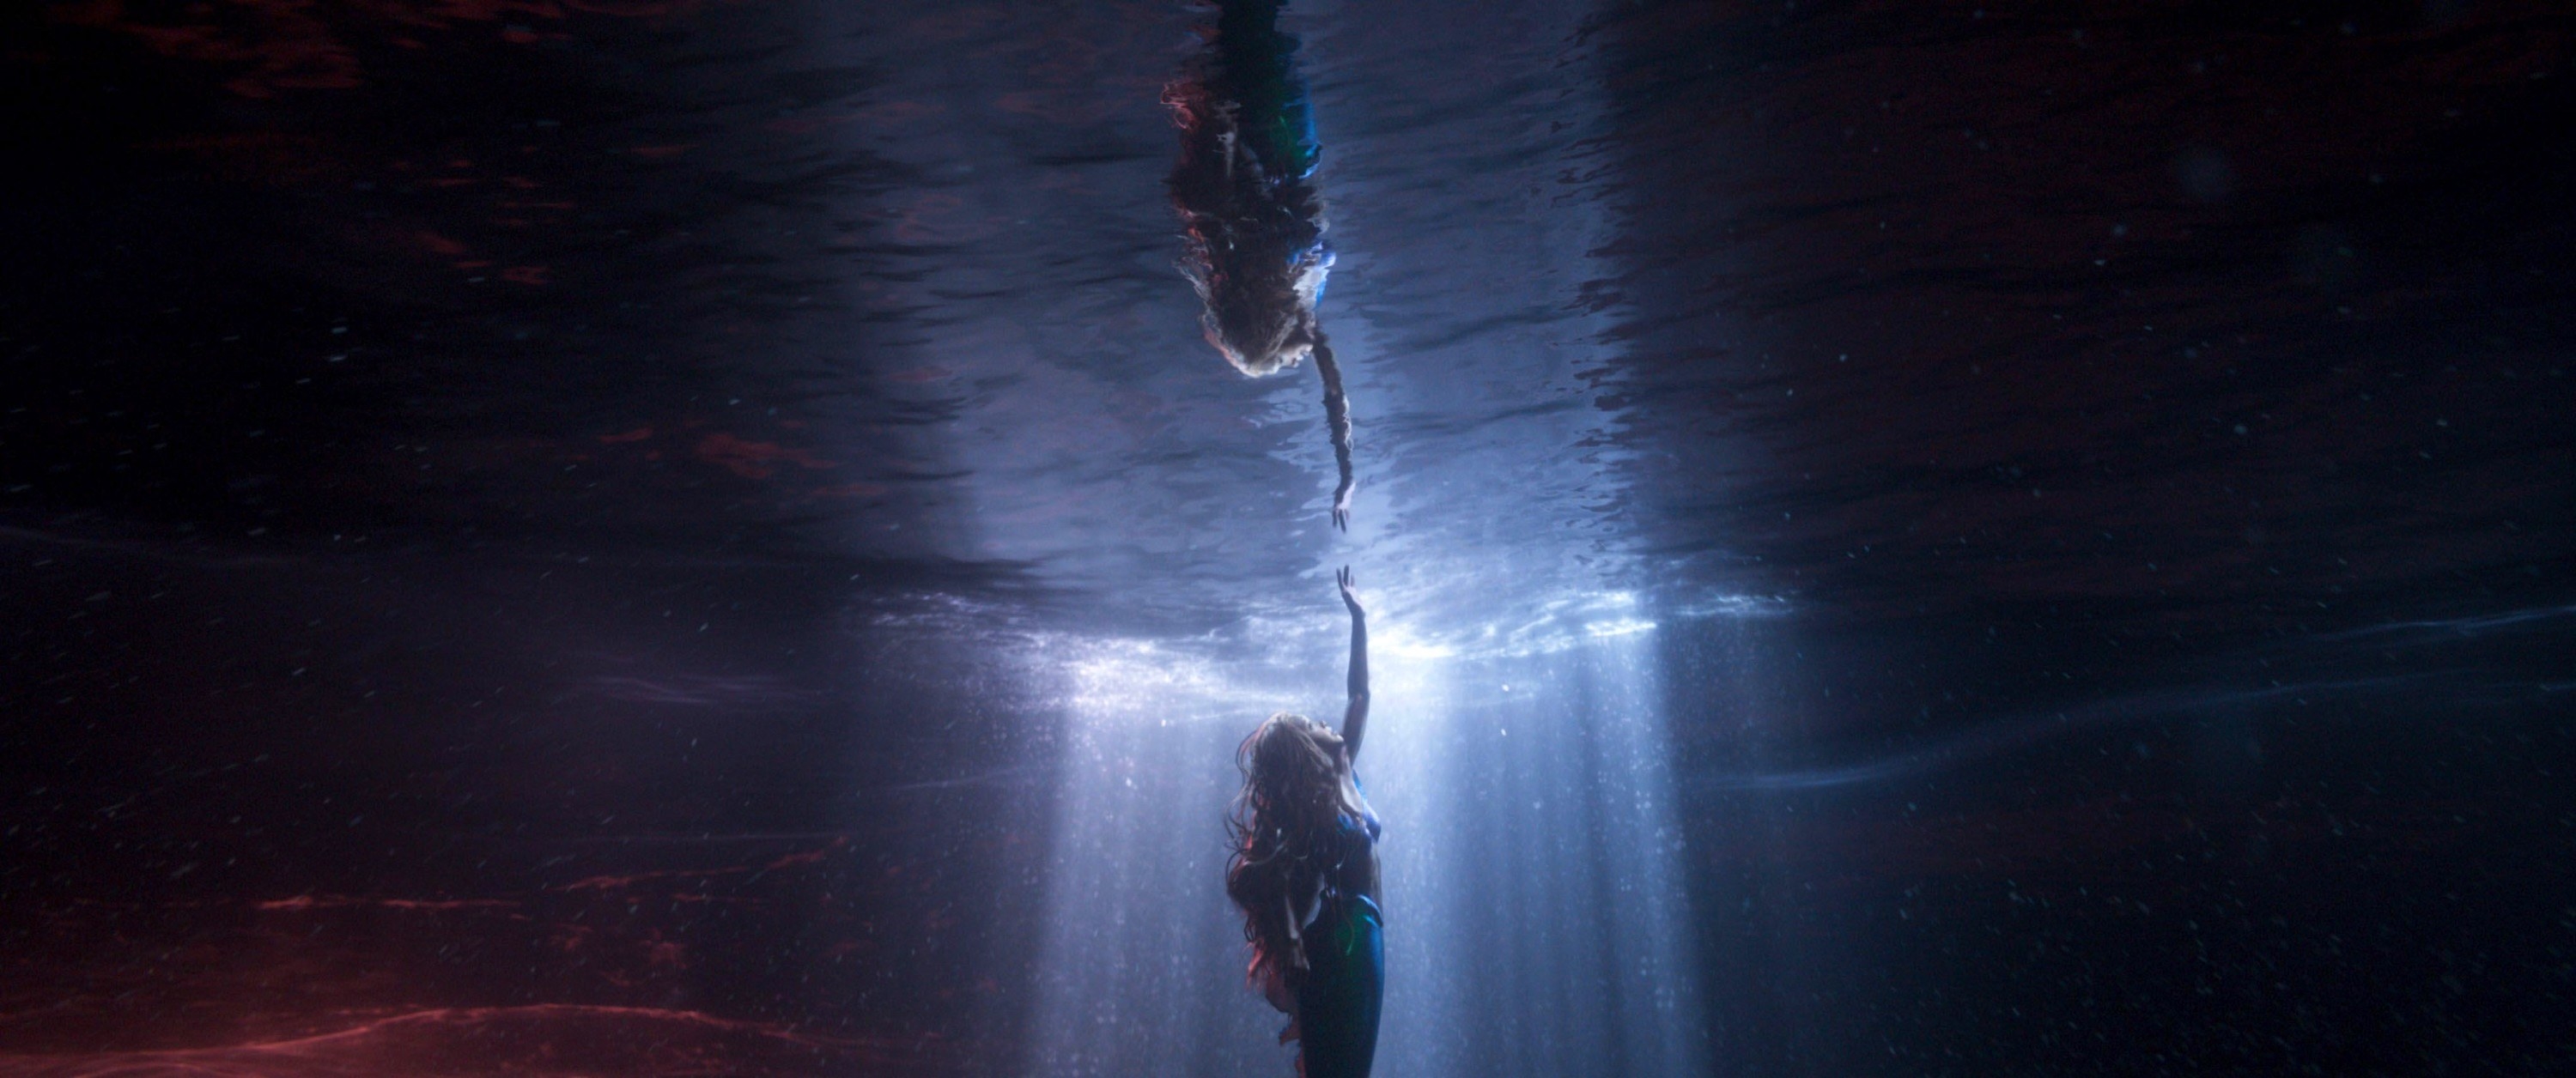 5 things you need to know about Siren, the new mermaid show that's more  Dark than Disney